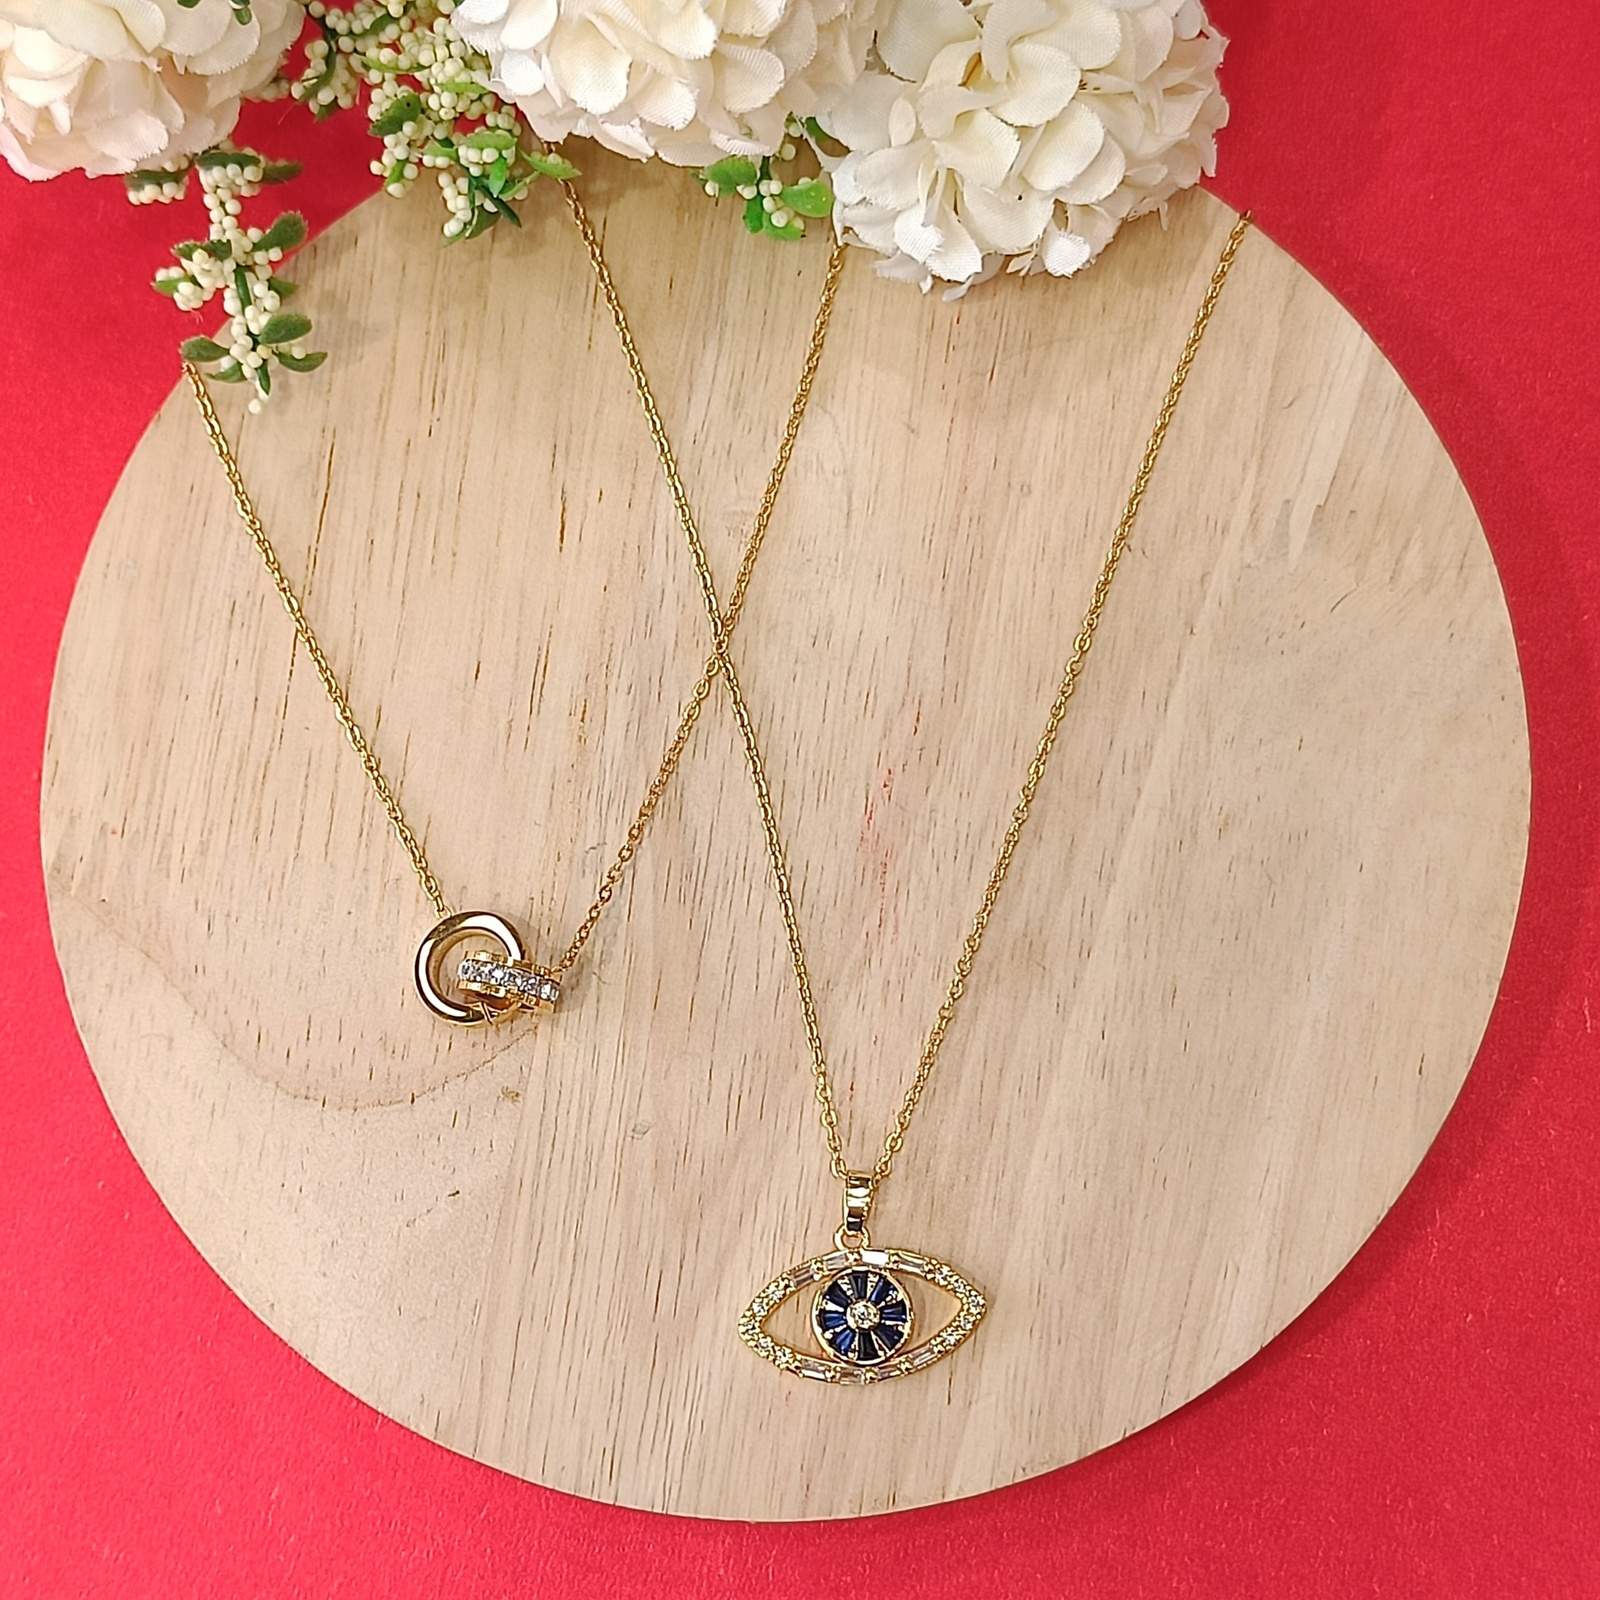 Layla Neckchain combo offer - Buy 1 Get 1 Free